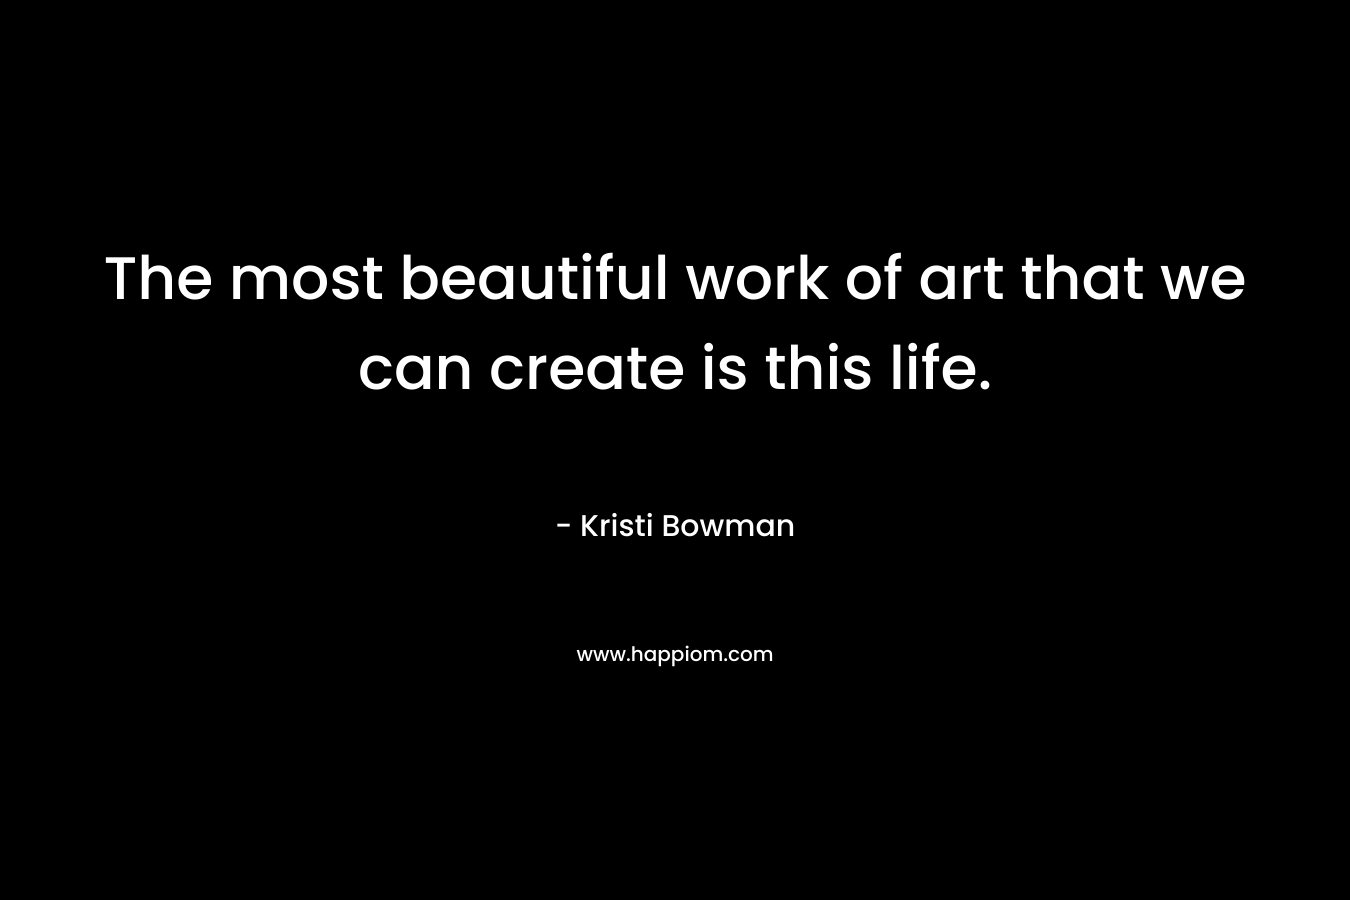 The most beautiful work of art that we can create is this life. – Kristi Bowman